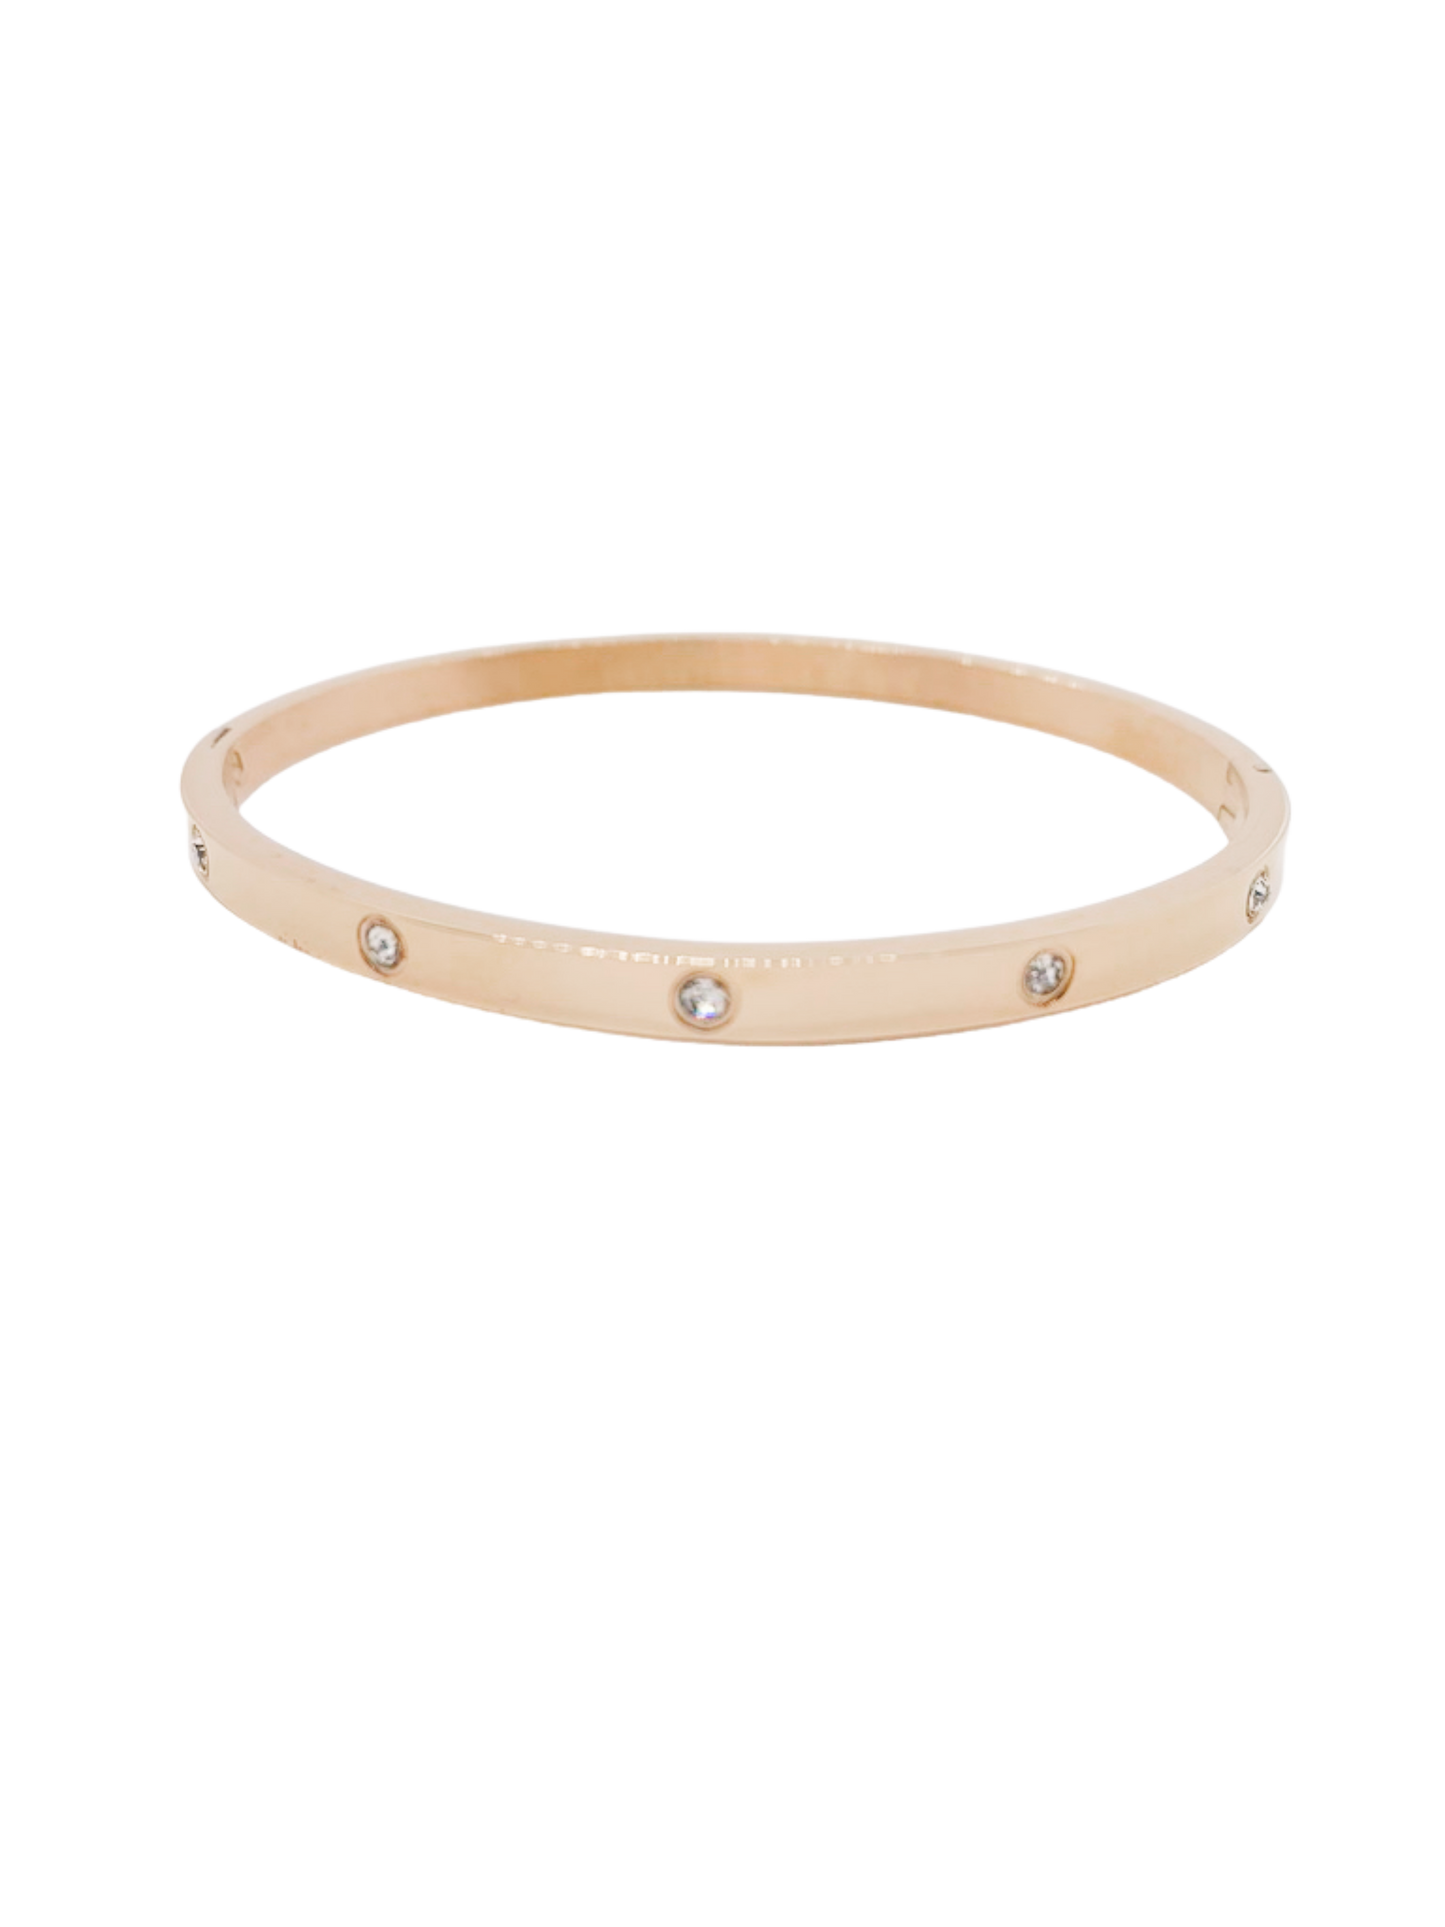 Stainless steel and 14K gold plated jewellery, that is affordable and will last you a lifetime. Dainty designs, for you to wear it everyday, without loosing its colour..